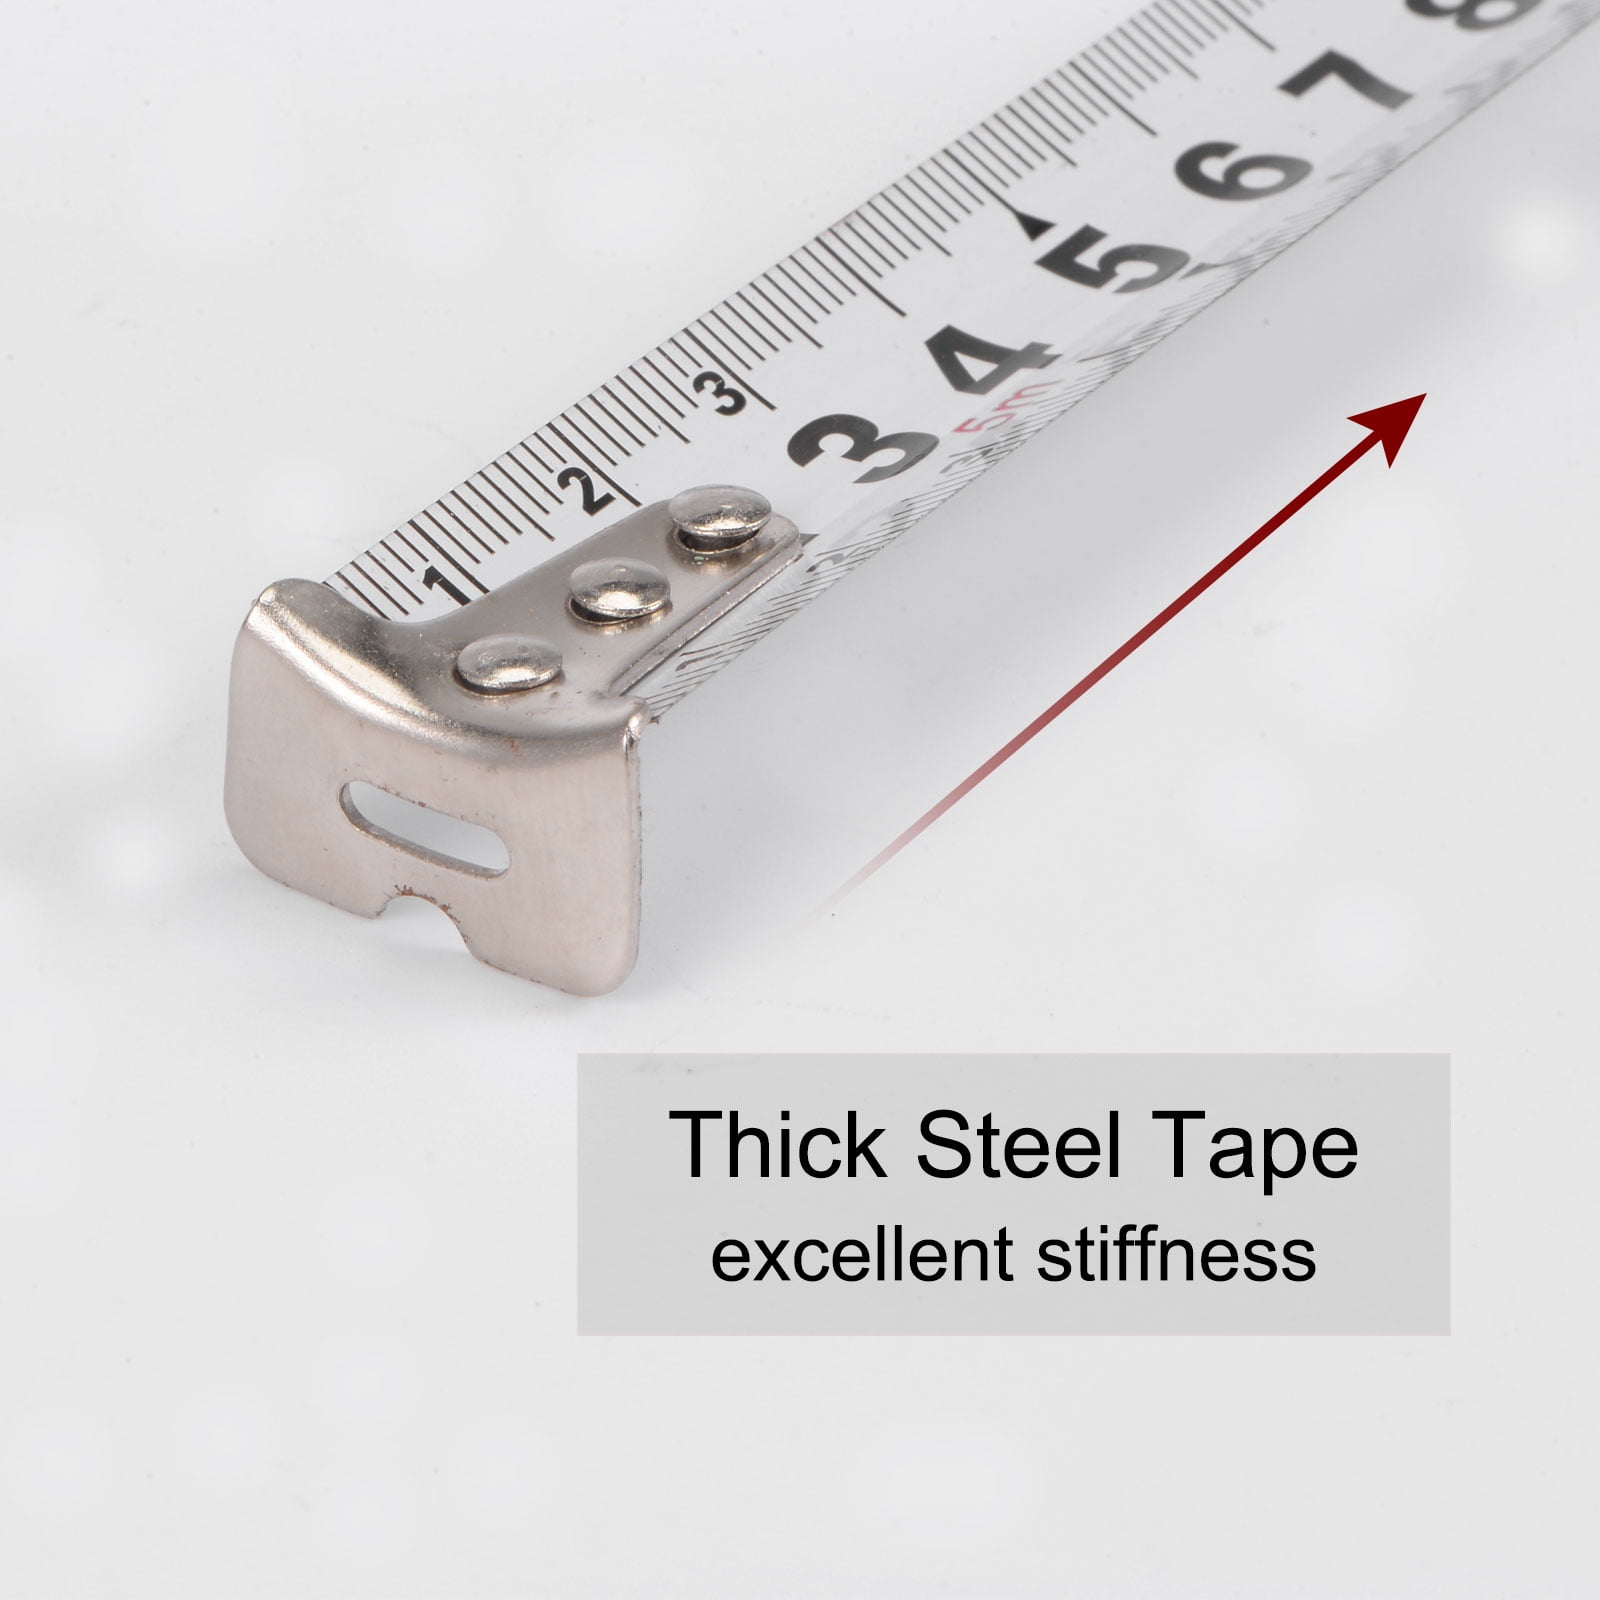 Stainless Steel Anti-corrosion Retractable Metric Ruler-25ft Tape